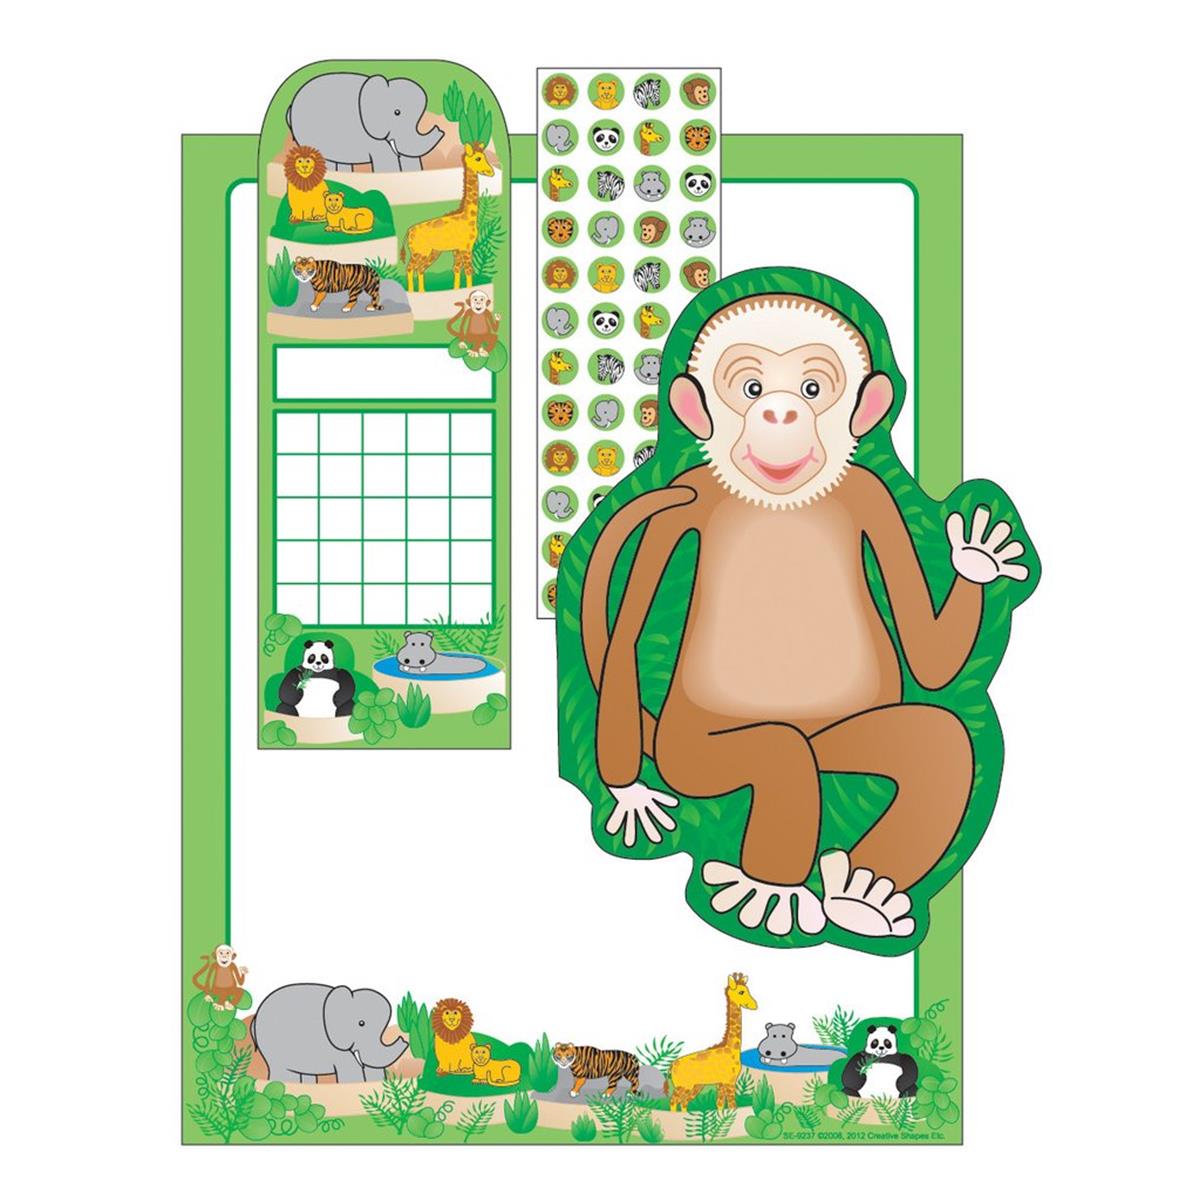 Picture of Creative Shapes Etc SE-7952 11 x 8.5 in. Stationery Set - Zoo